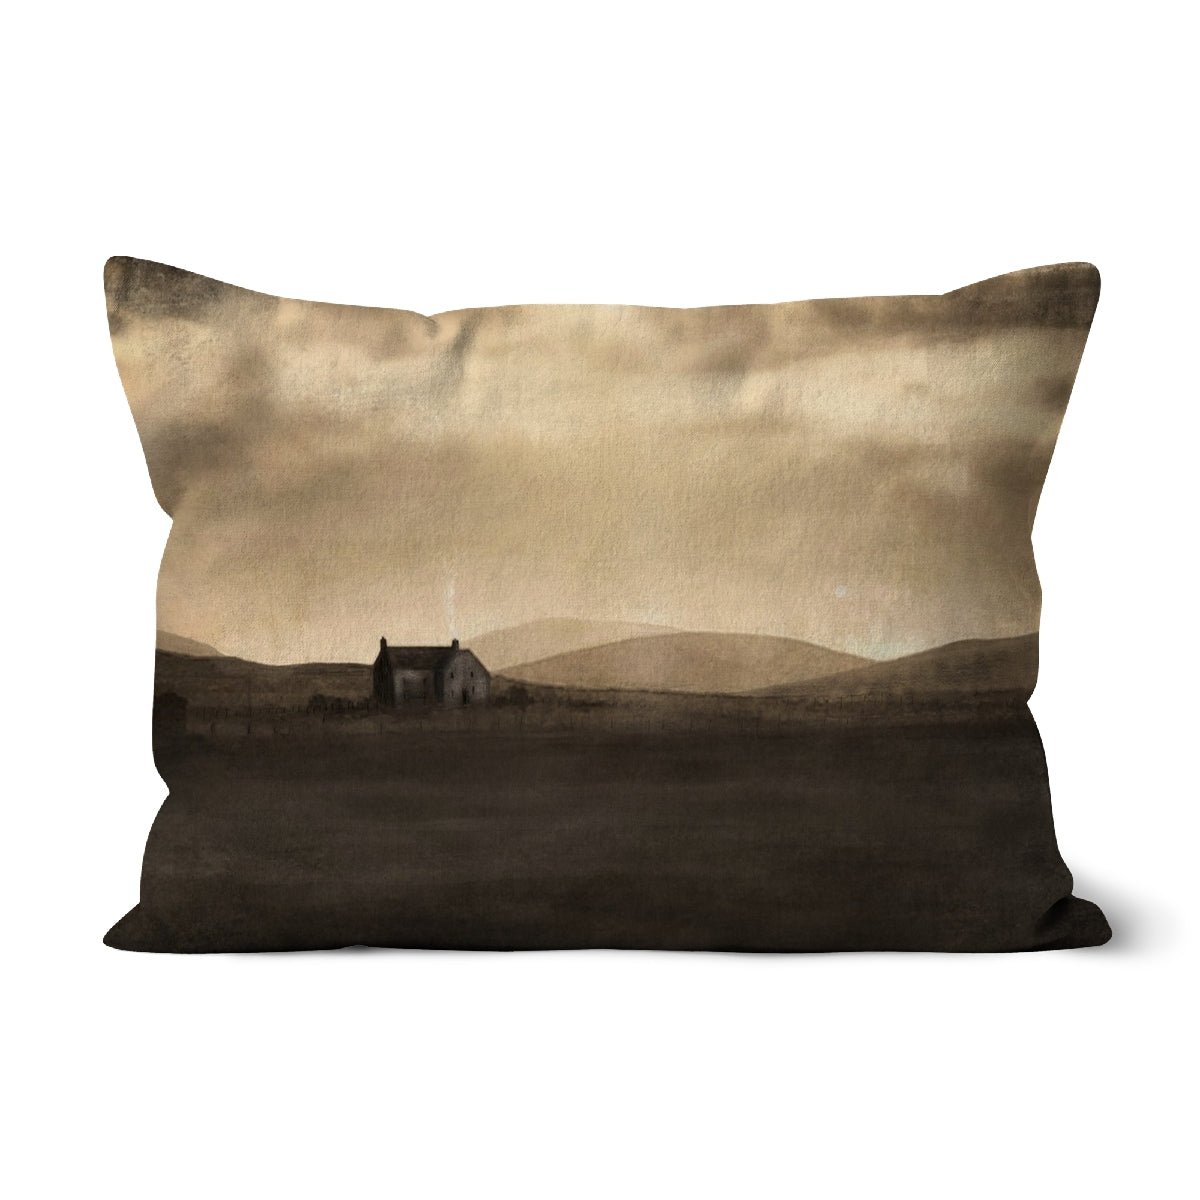 A Moonlit Croft Art Gifts Cushion-Cushions-Hebridean Islands Art Gallery-Faux Suede-19"x13"-Paintings, Prints, Homeware, Art Gifts From Scotland By Scottish Artist Kevin Hunter